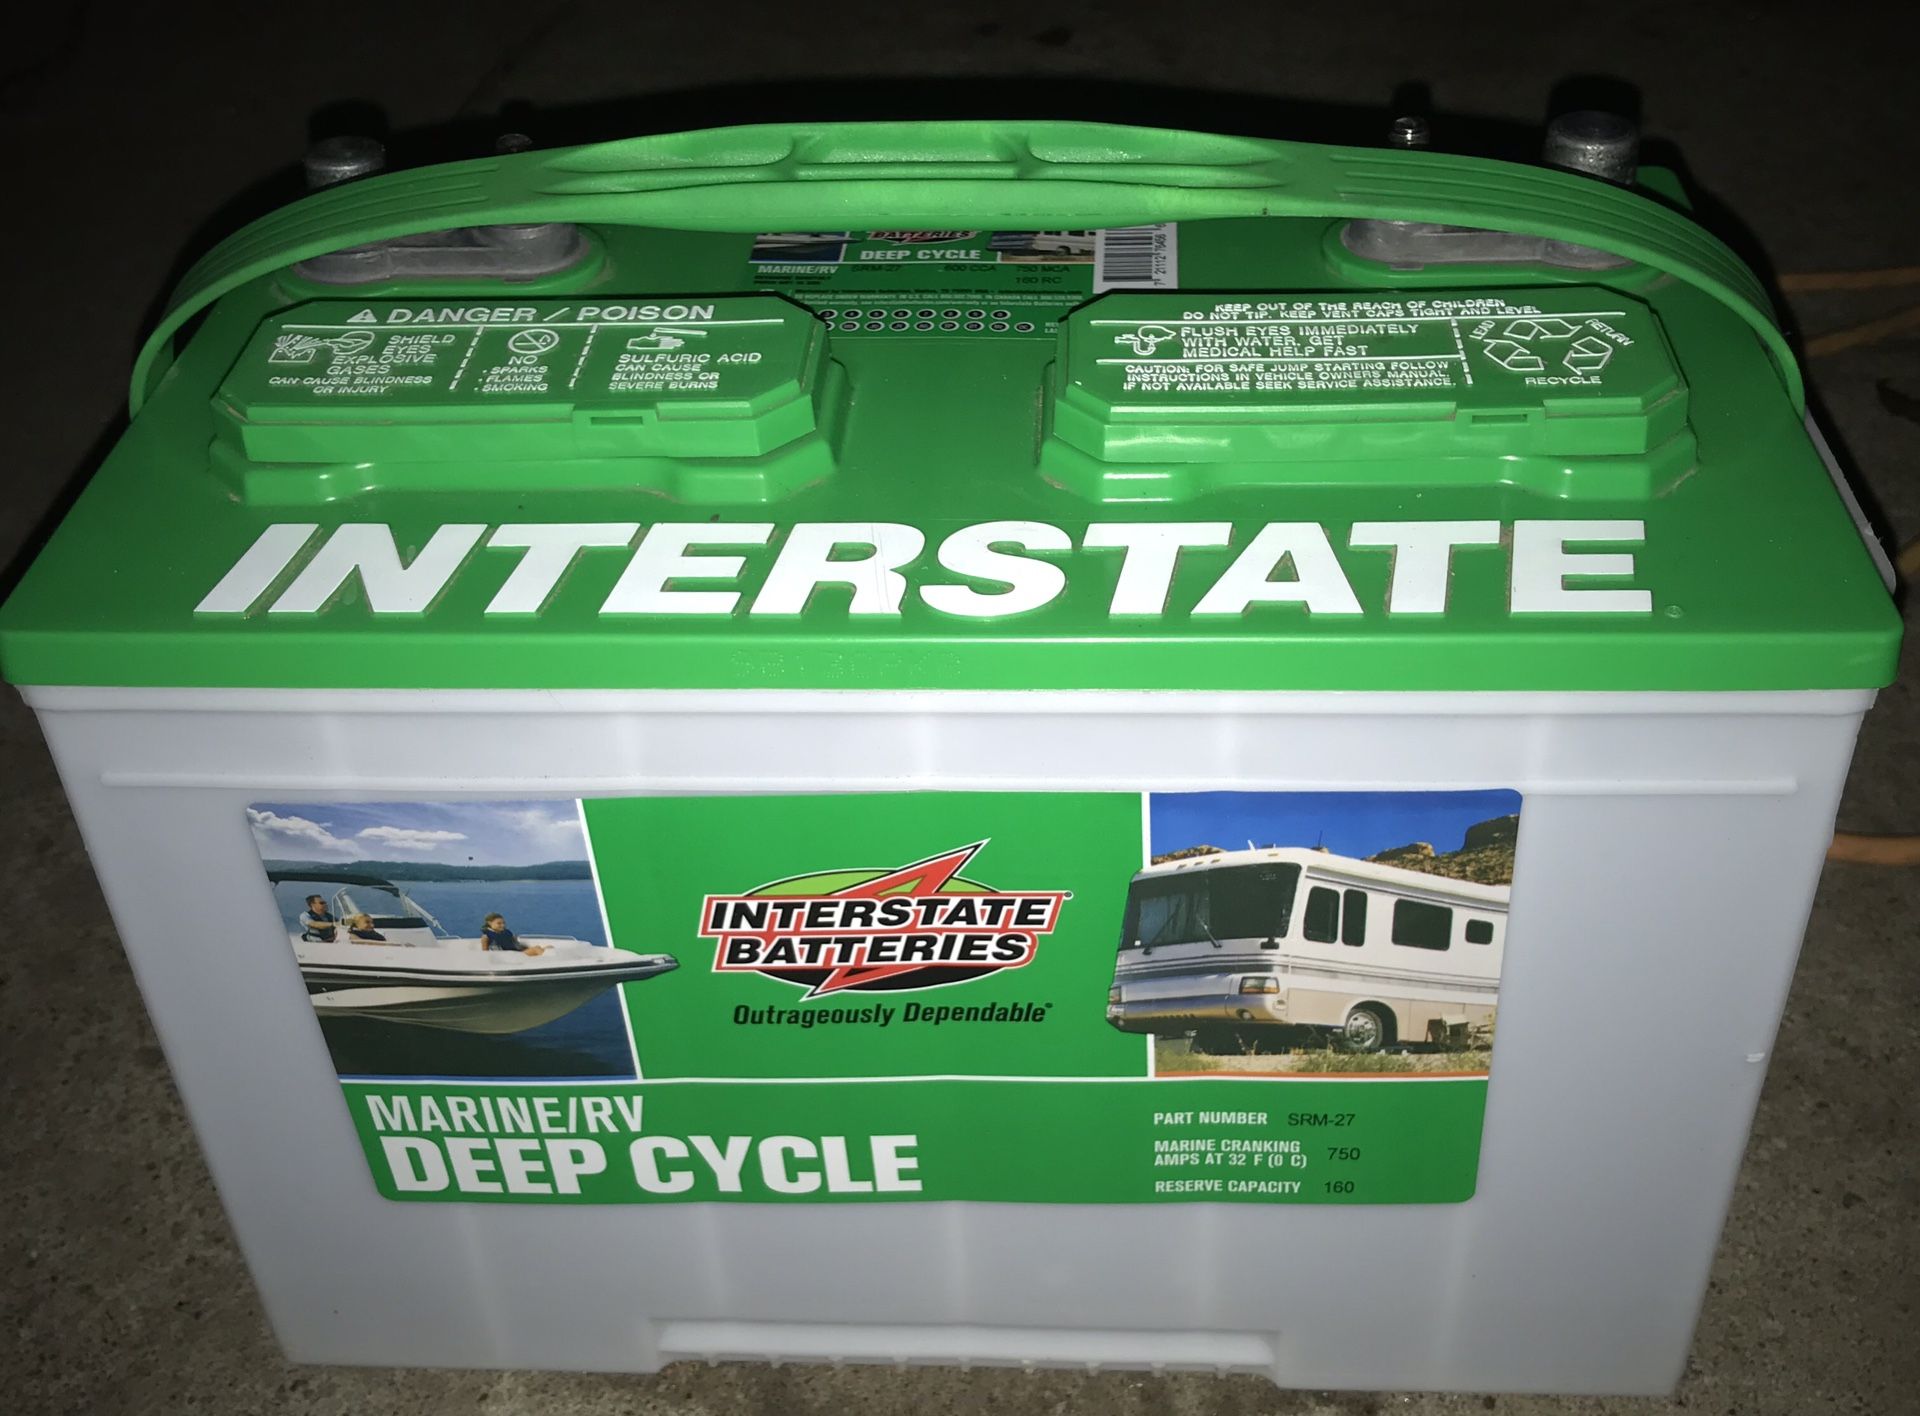 Brand new interstate battery deep cycle